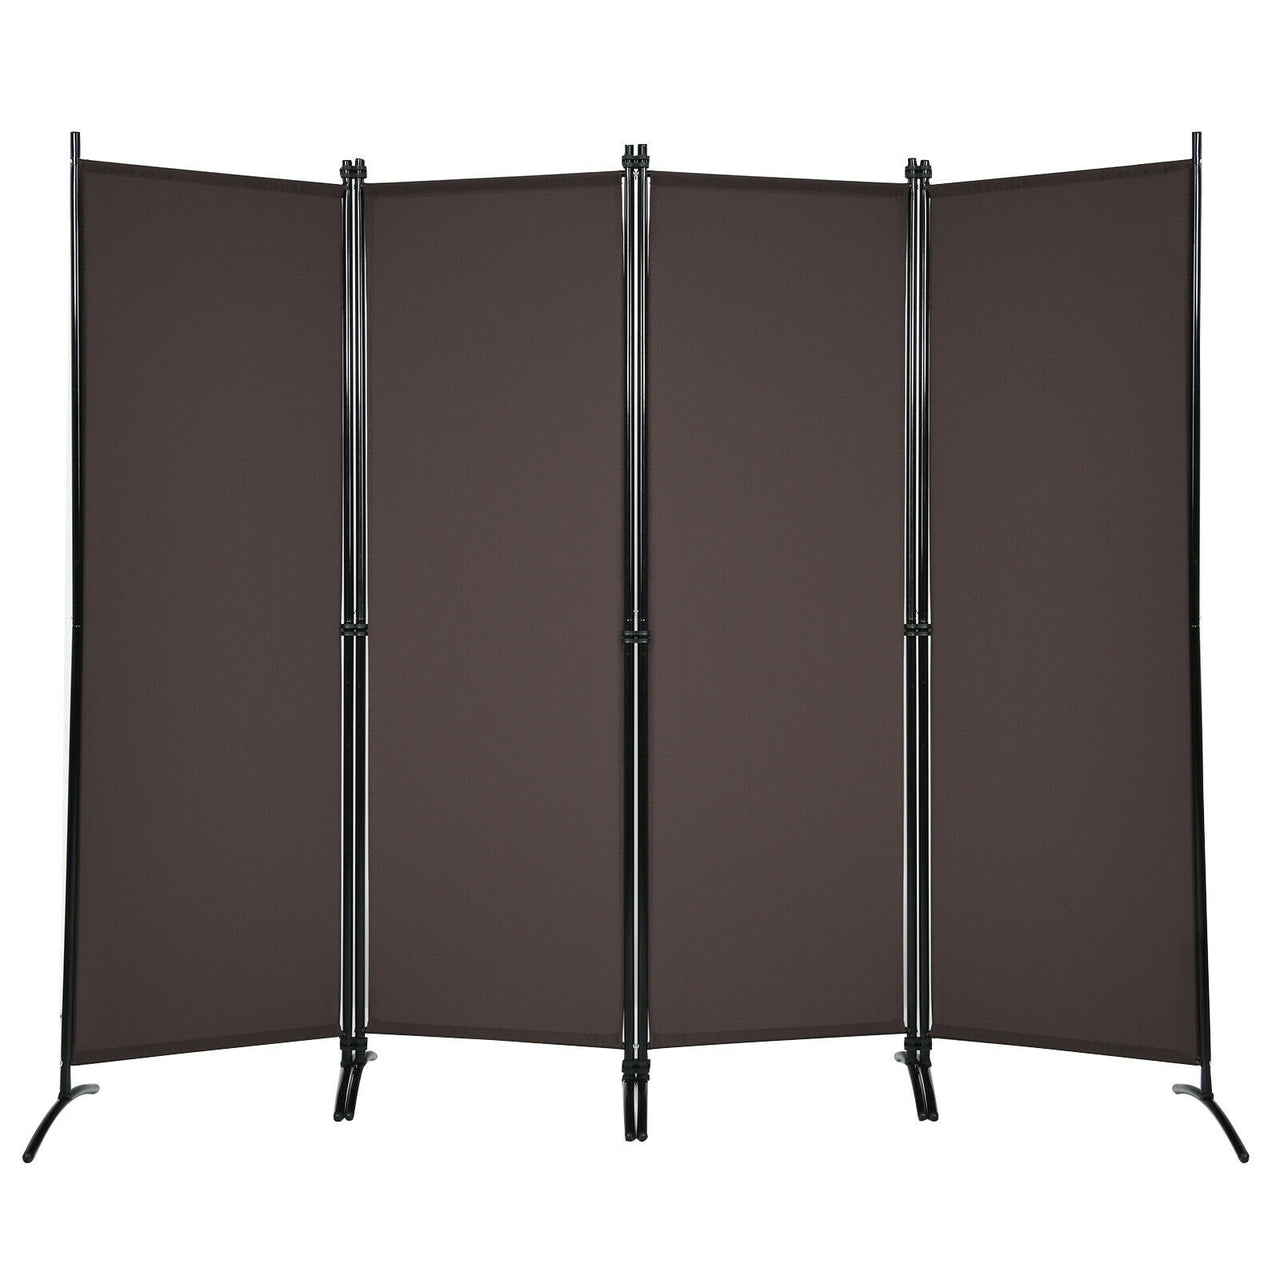 5.6 Feet 4 Panel Room Divider with Steel Frame - Gallery View 1 of 10